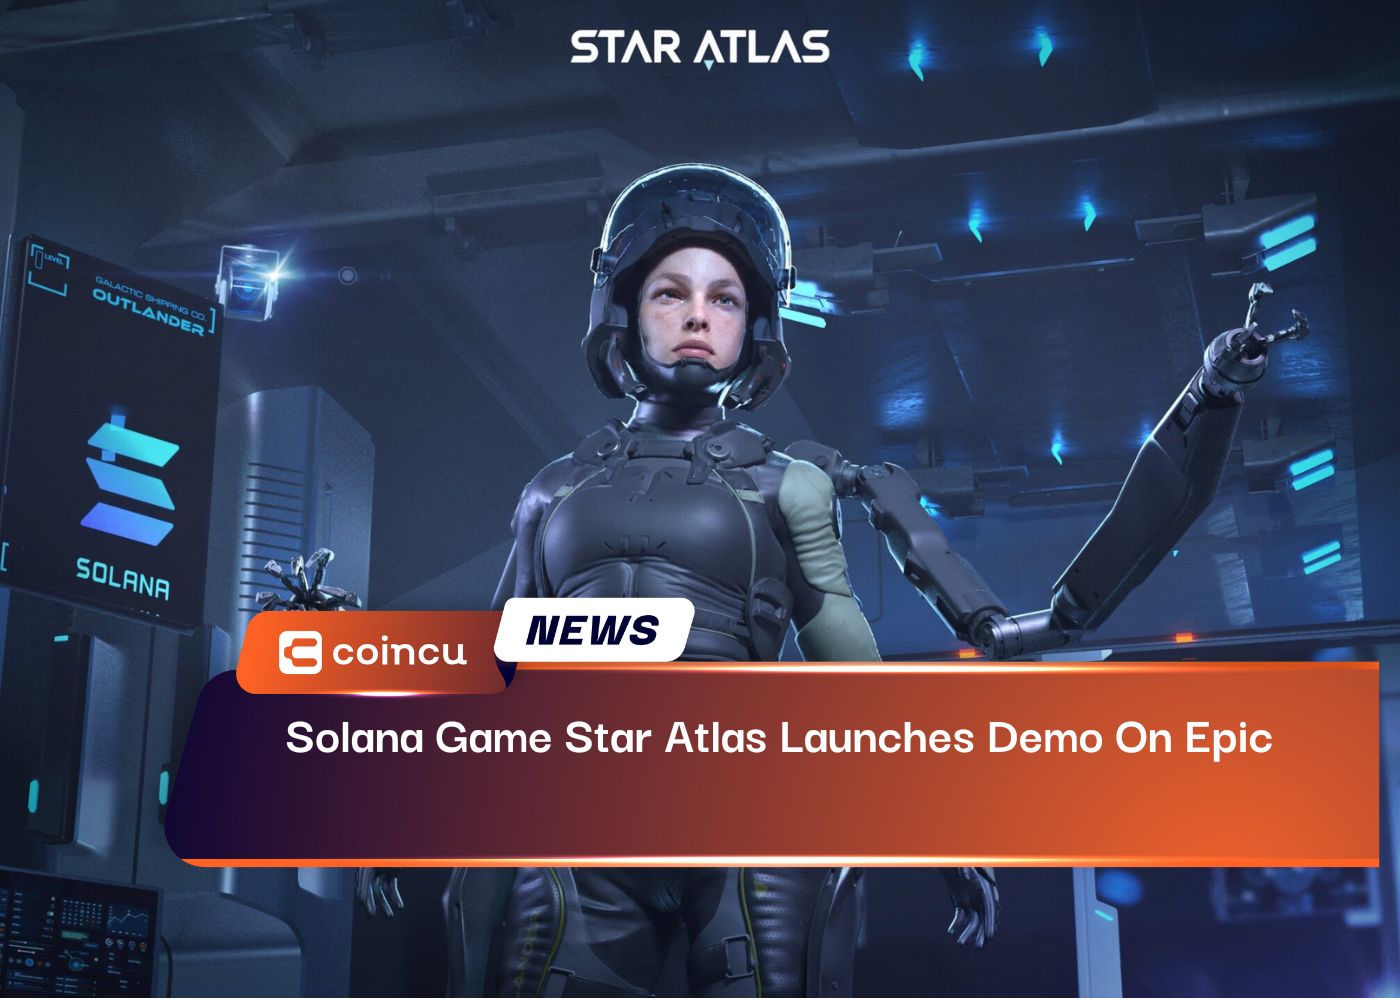 Solana Game Star Atlas Launches Demo On Epic